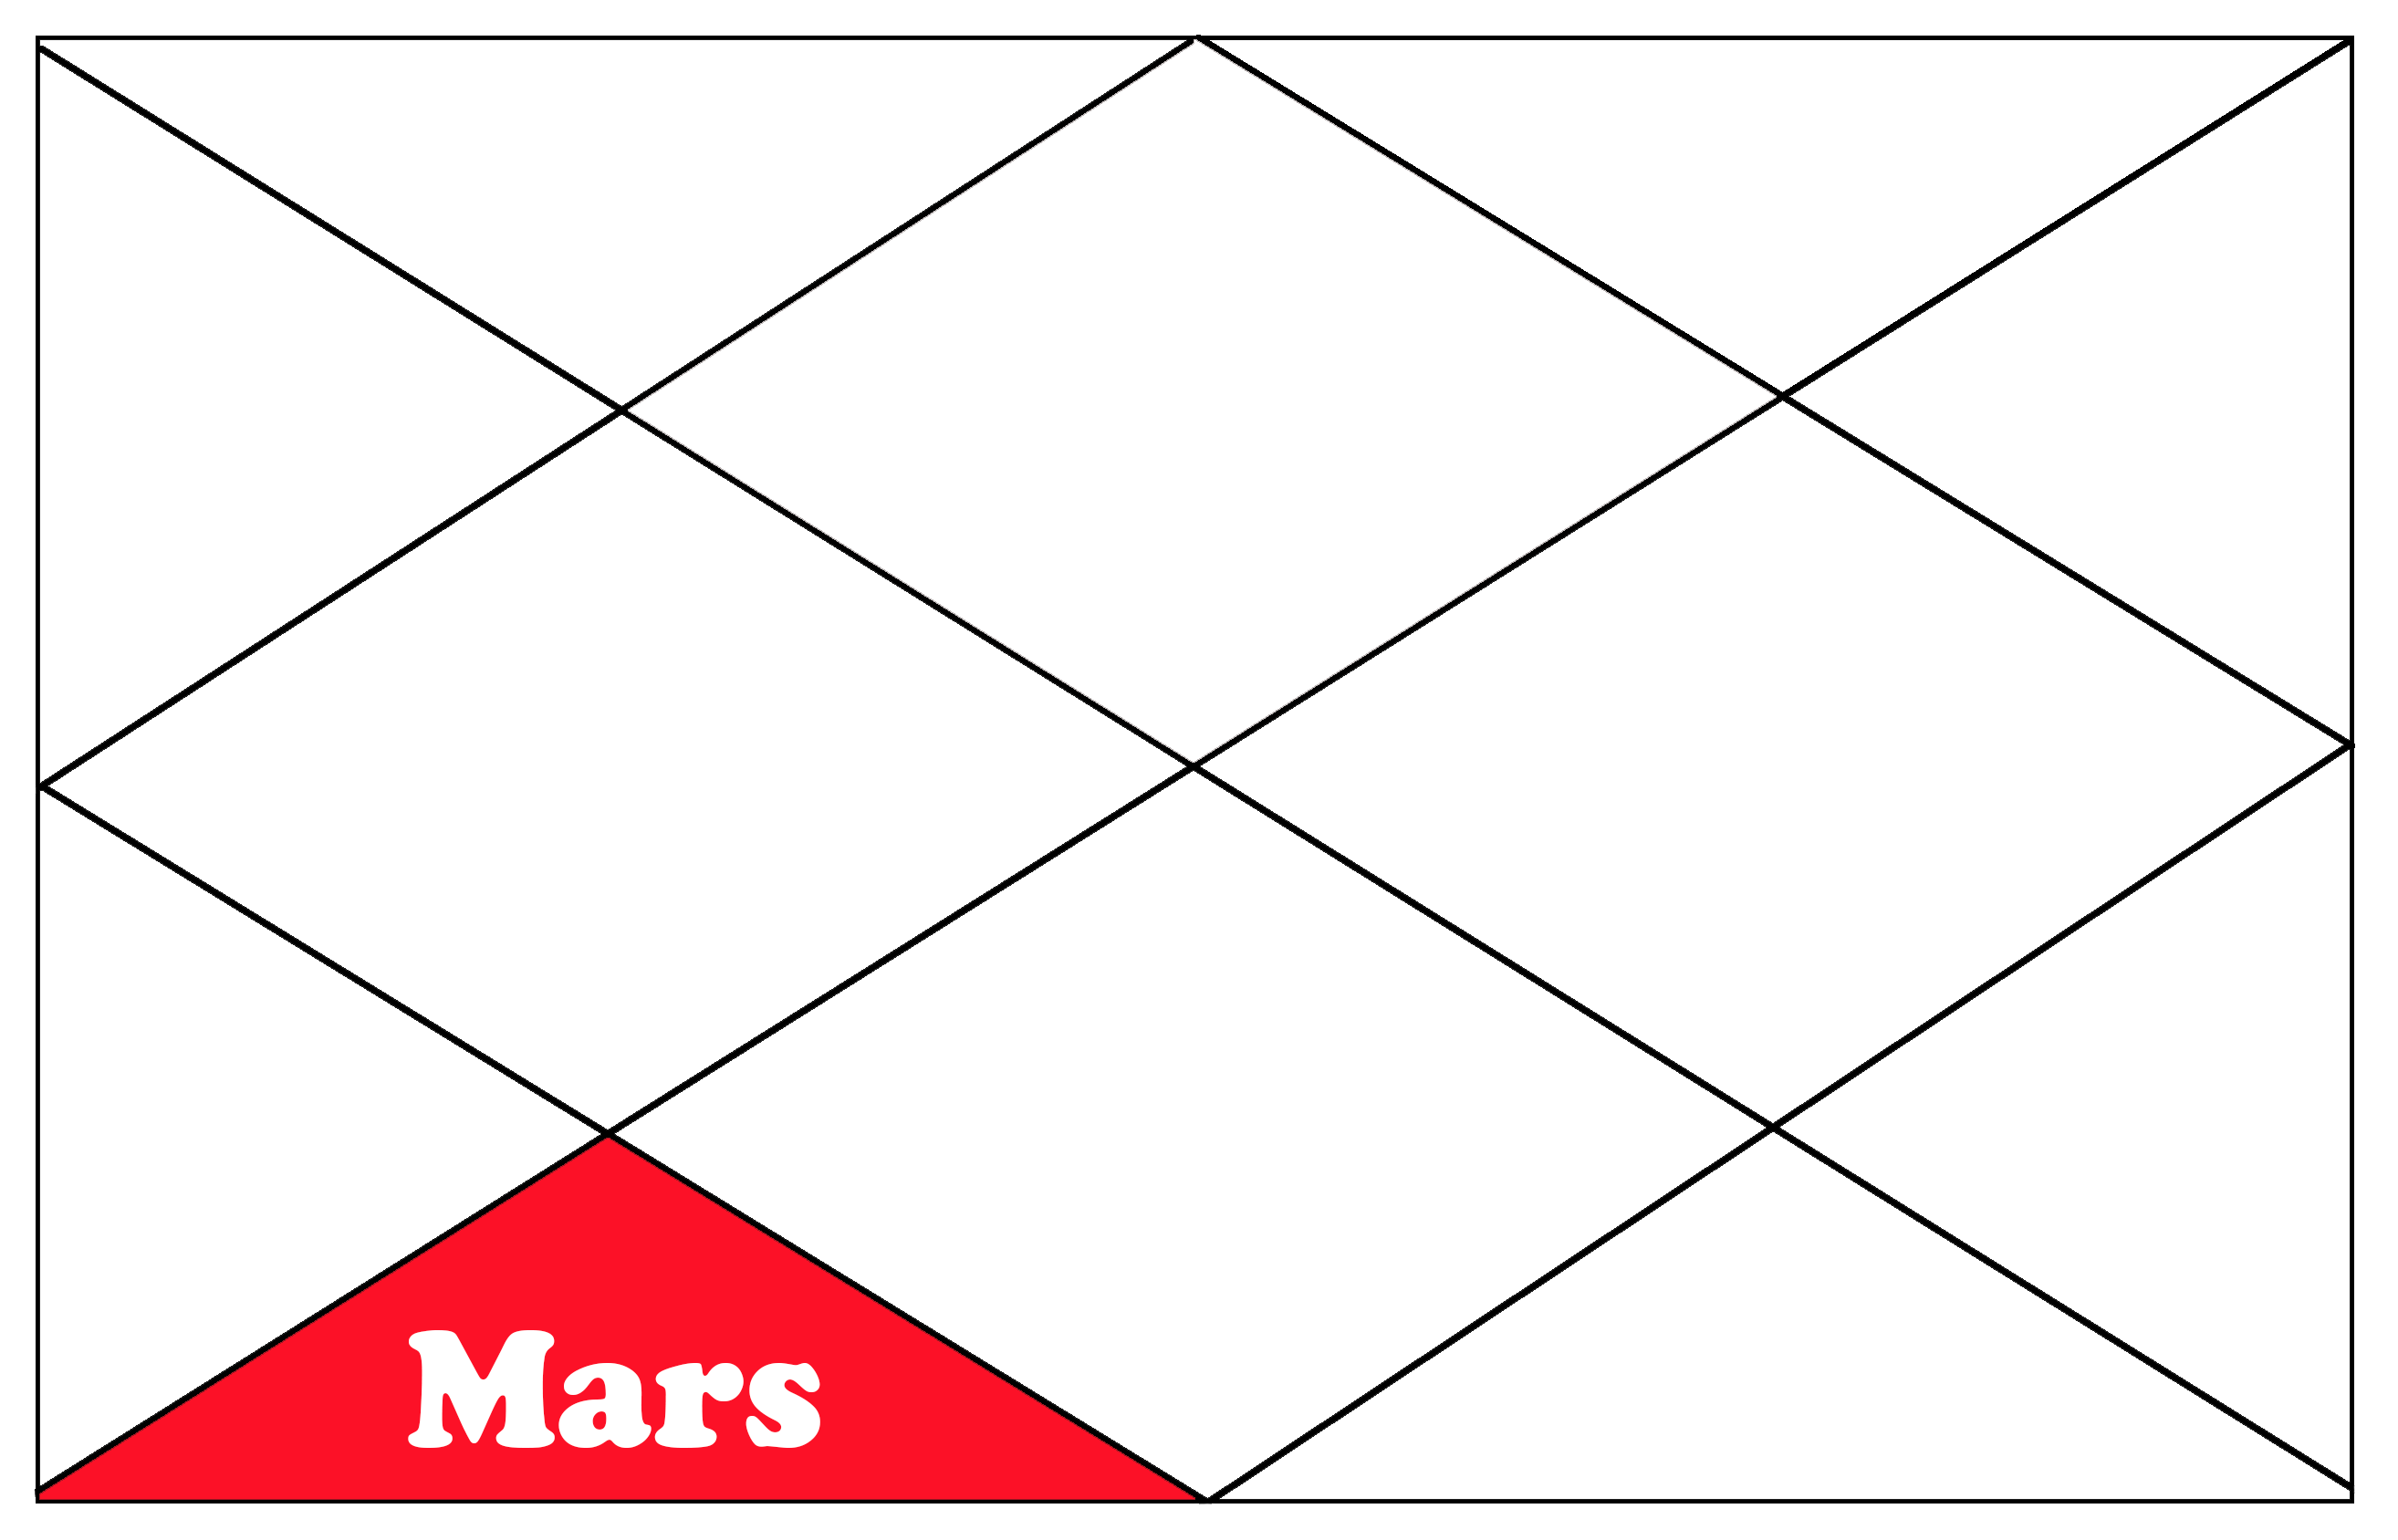 Mars in the 6th house